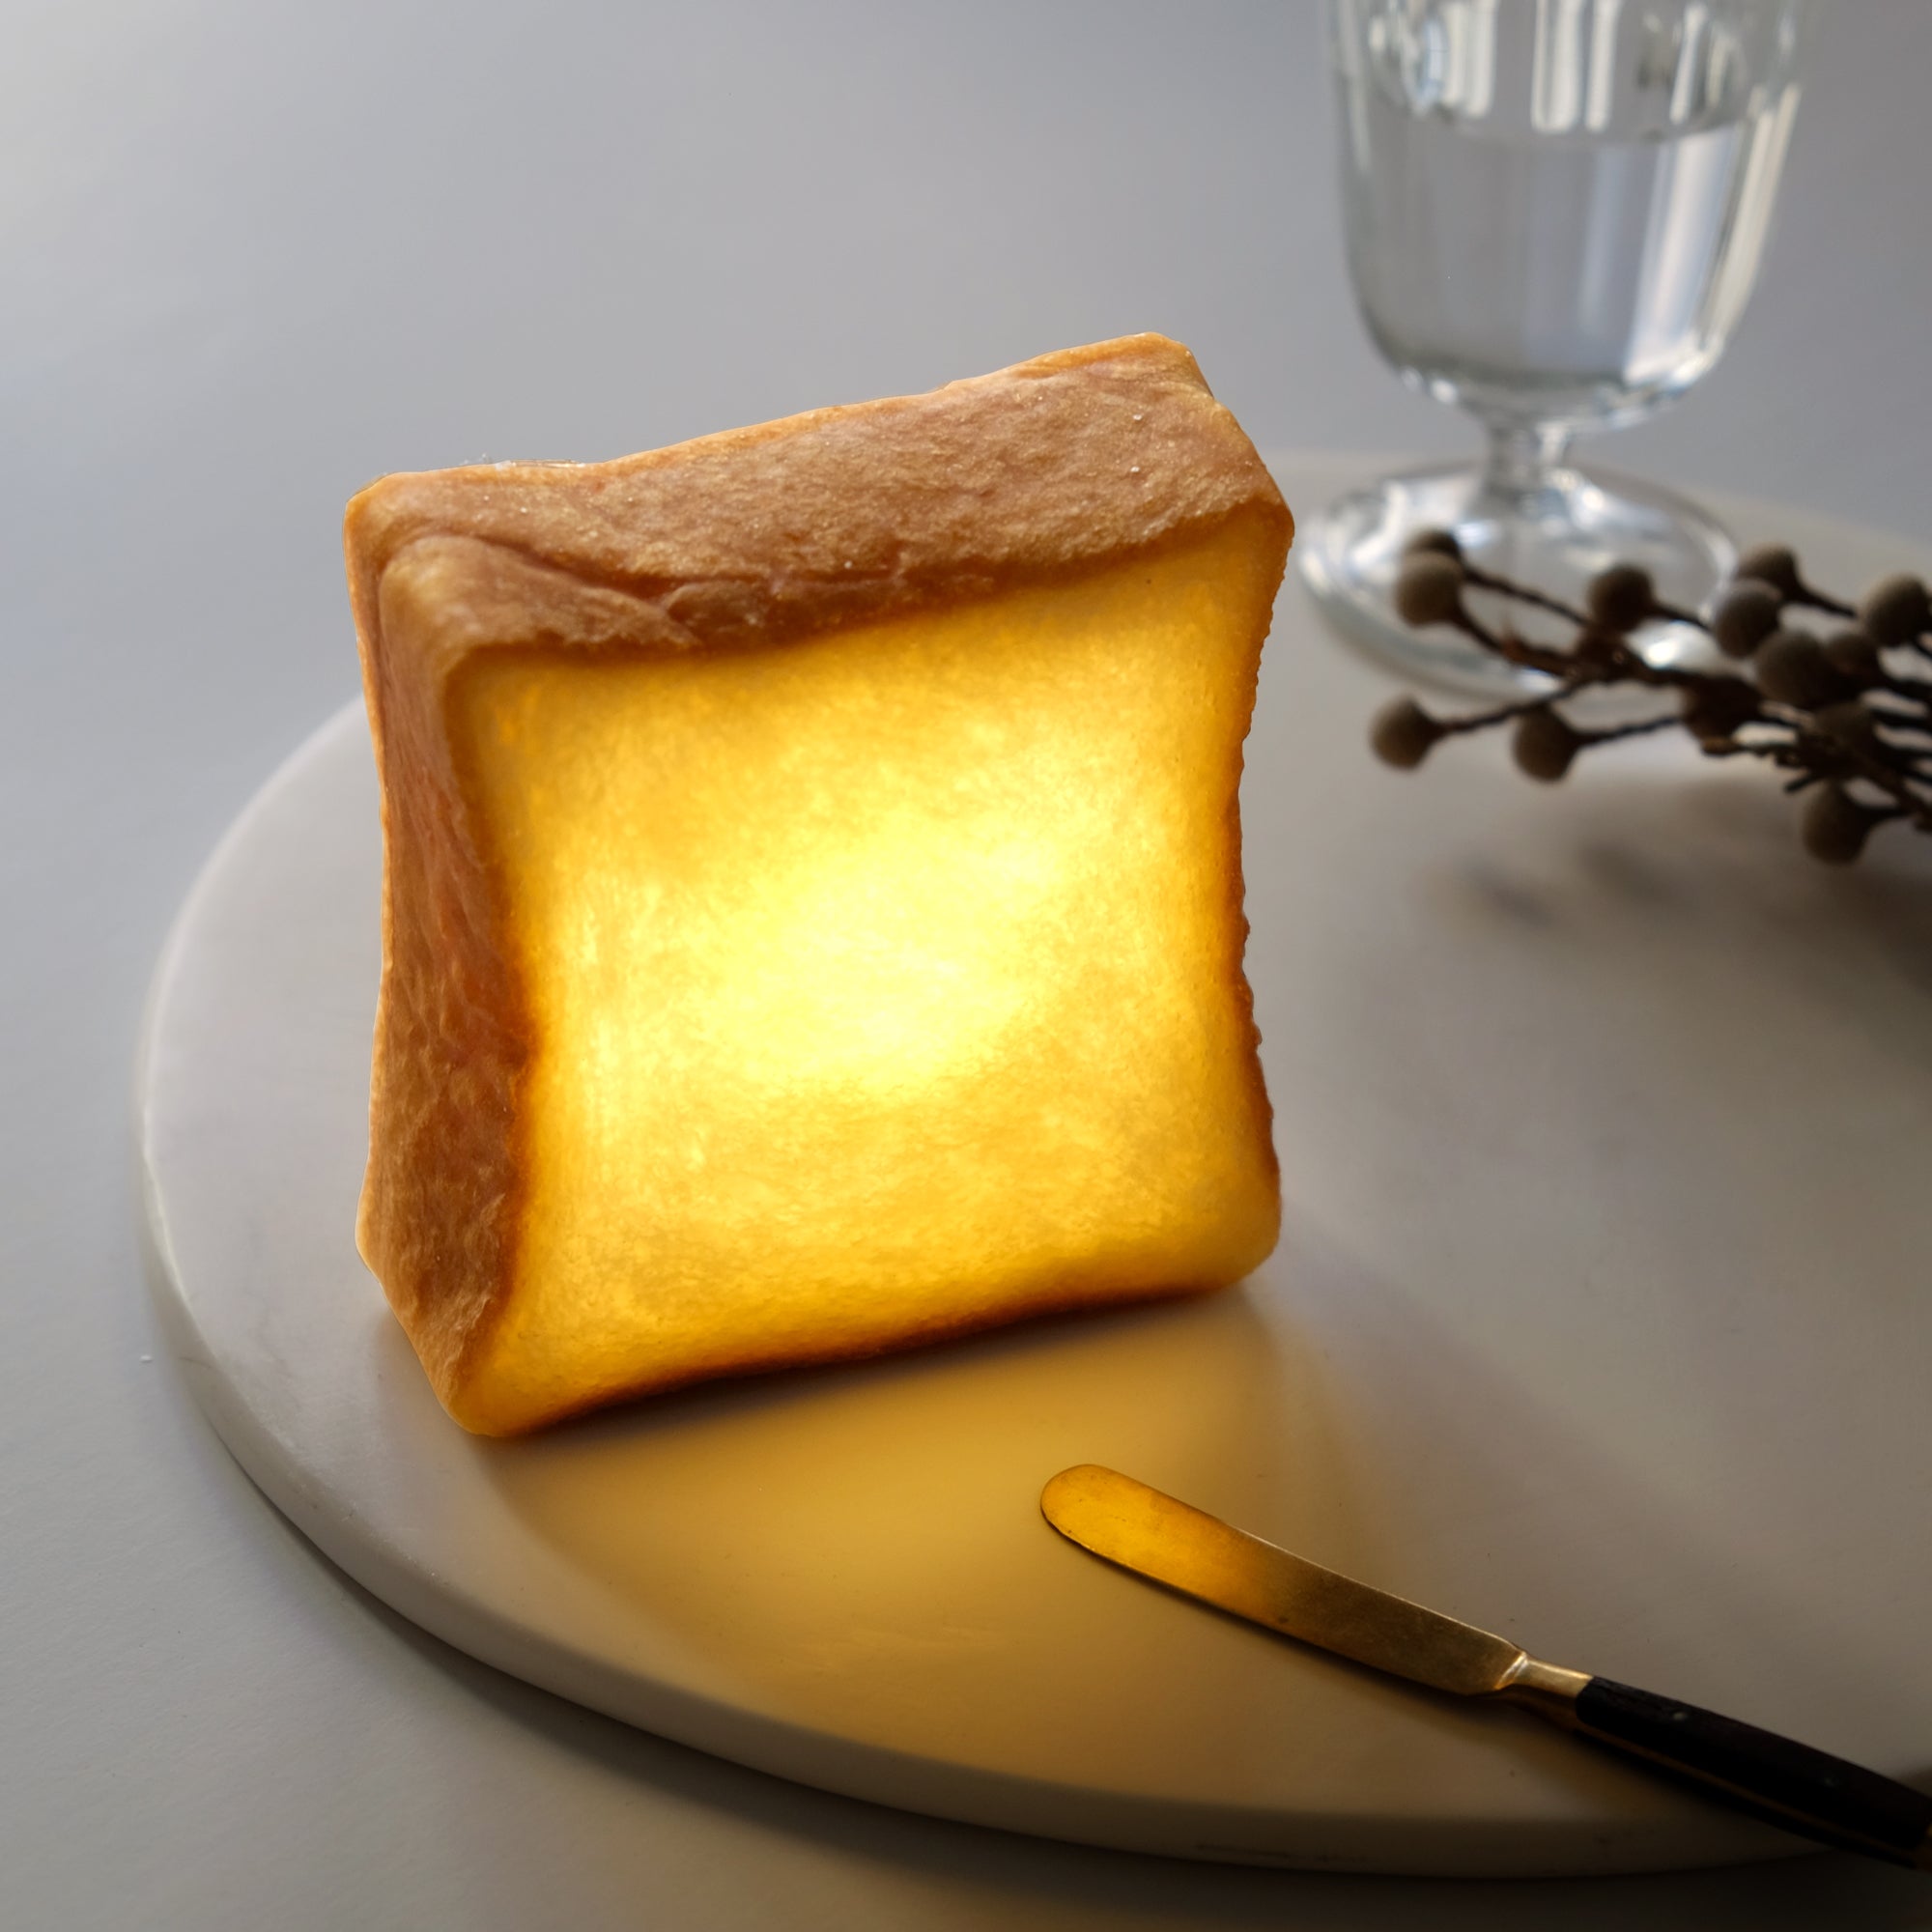 Toast Bread Lamp (Battery Powered LED Light) | Pampshade